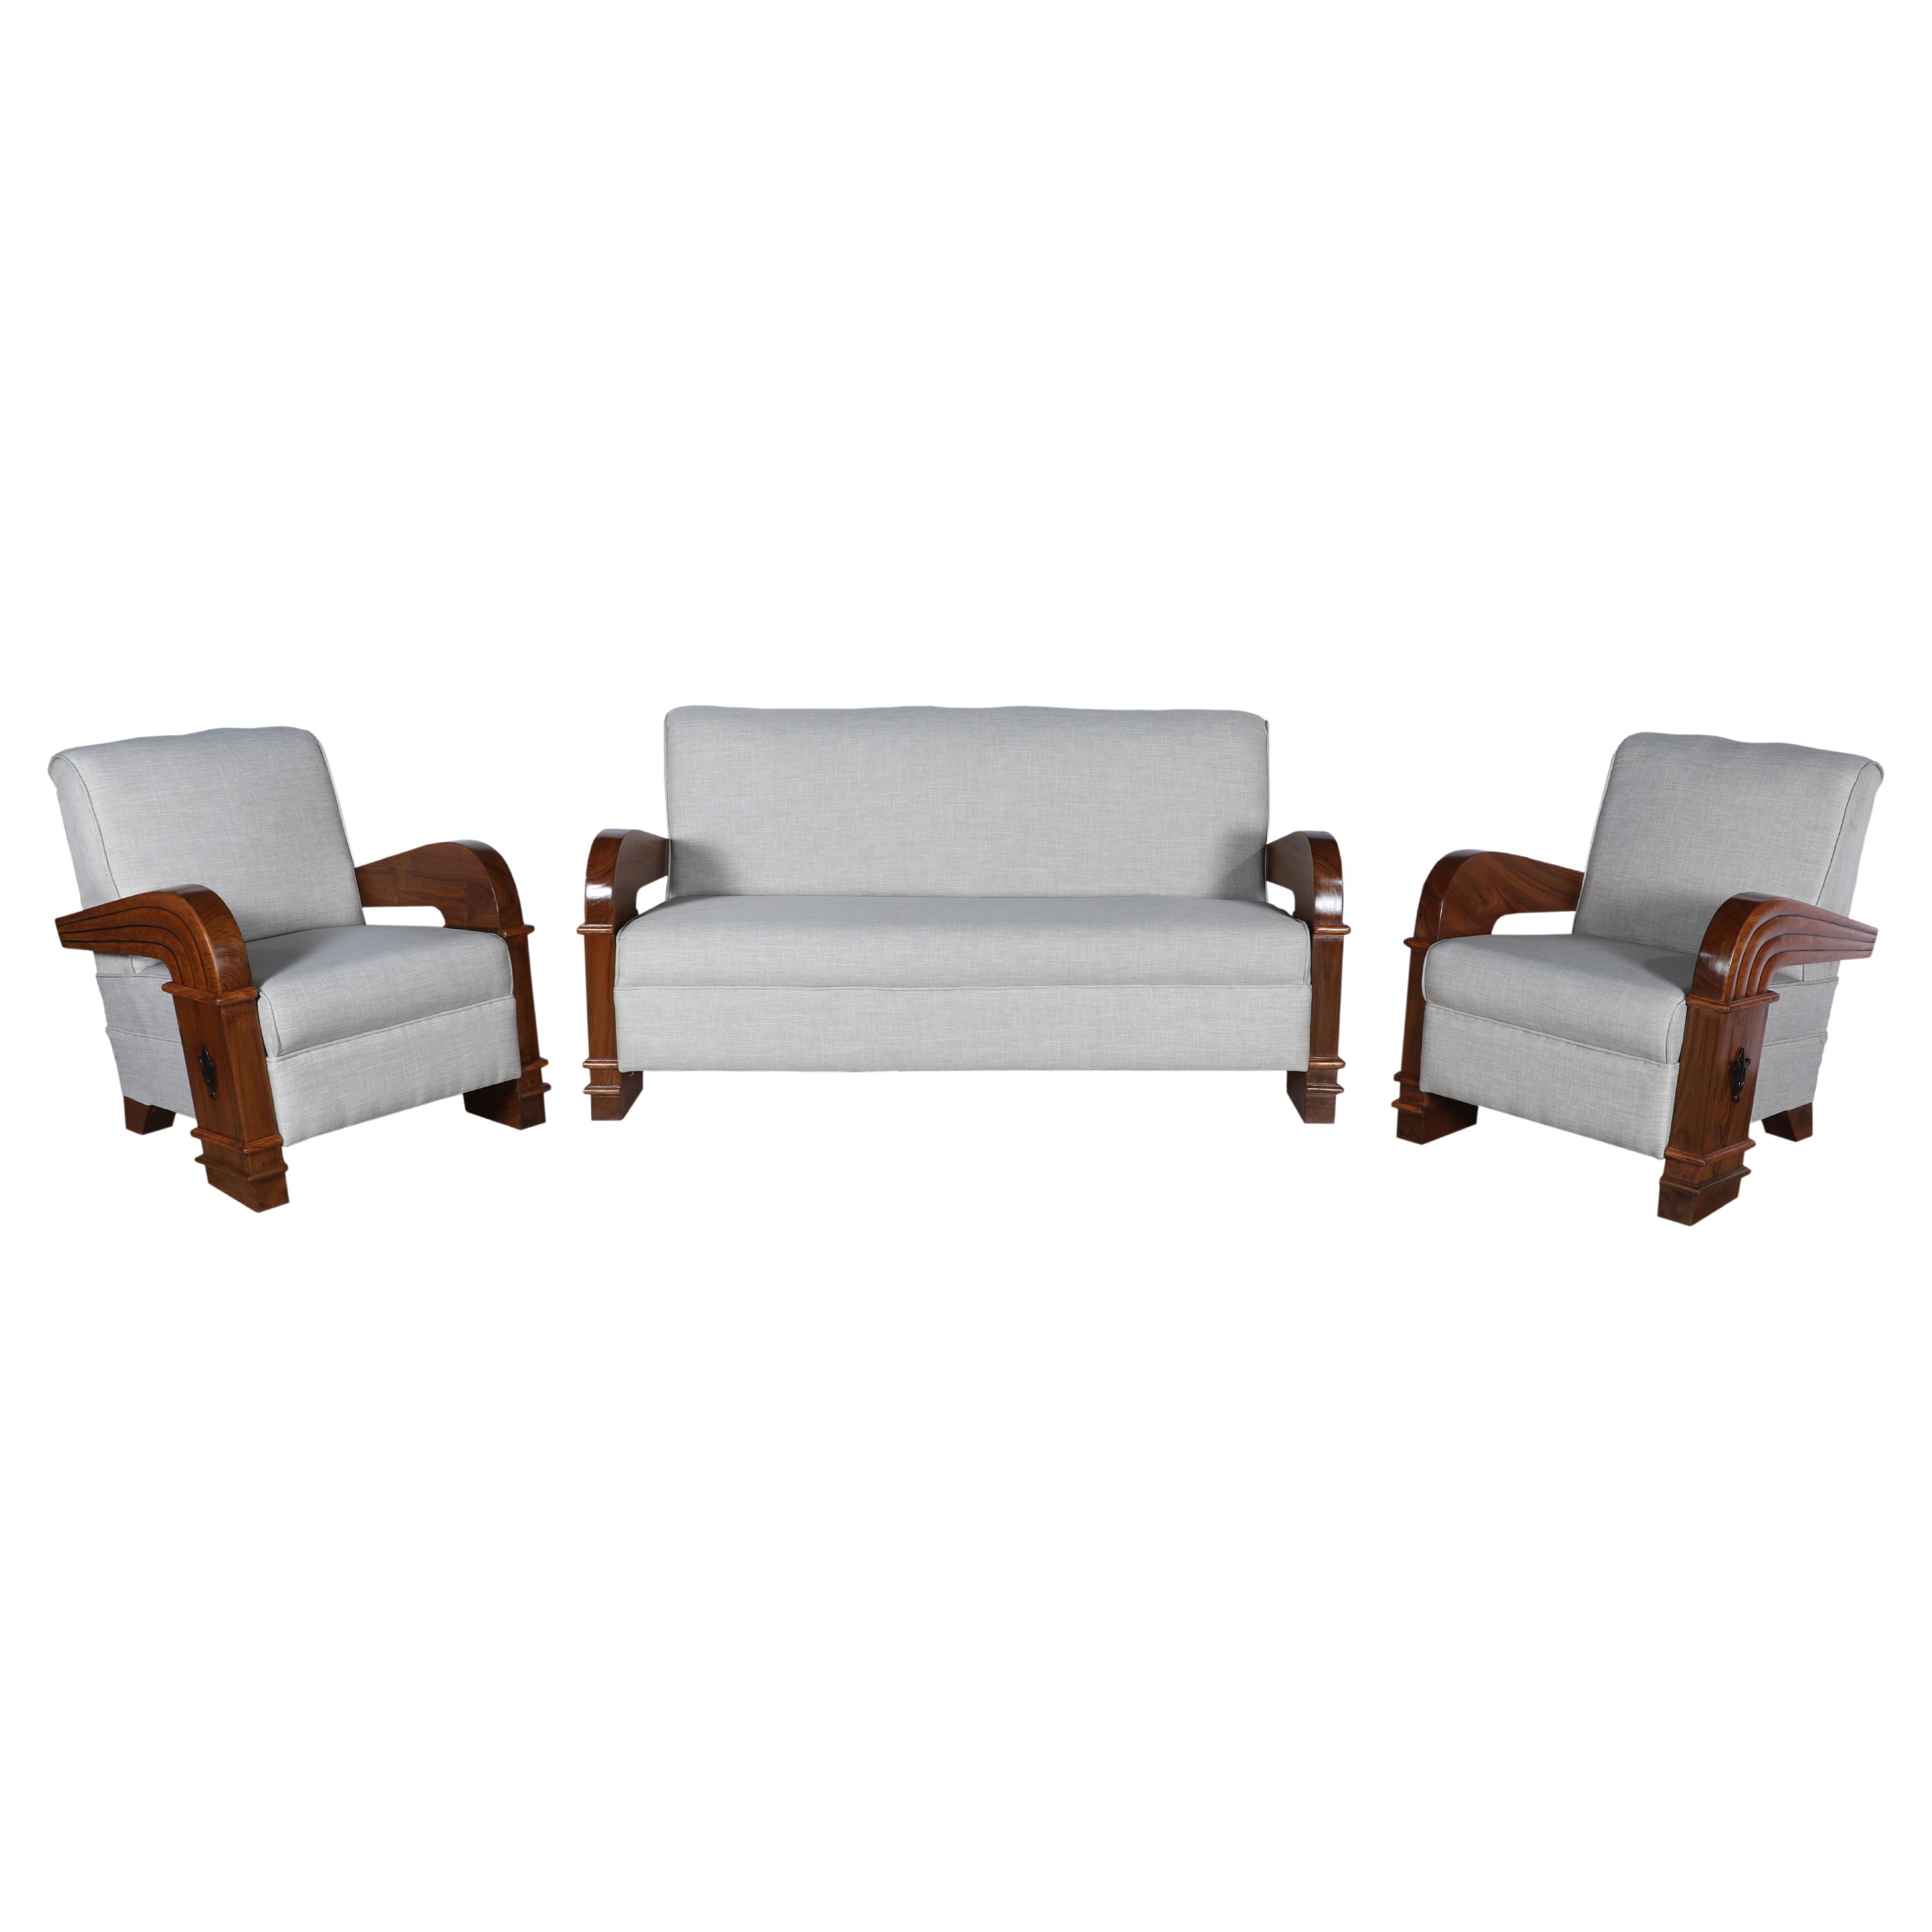 Art Deco Teak Suite of a Sofa and Two Chairs